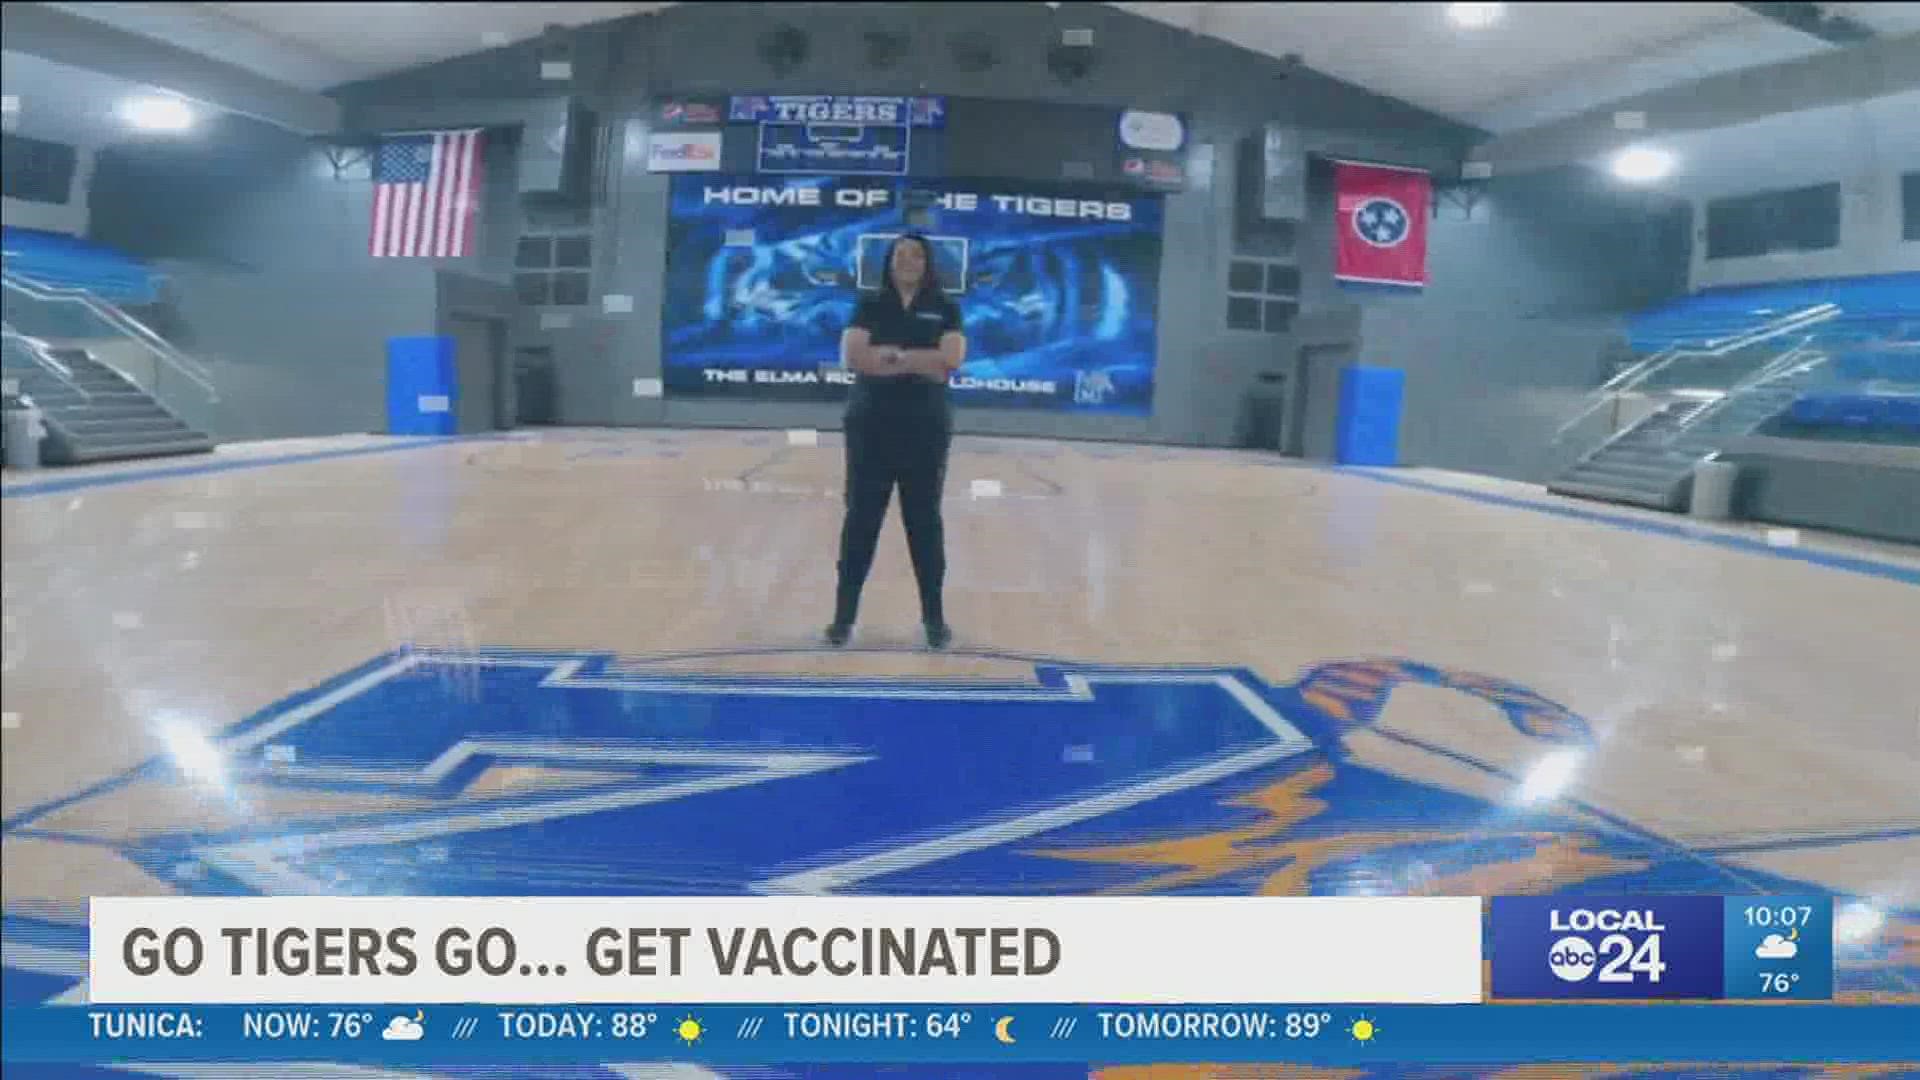 The Memphis Tigers are doing their part to encourage people to get COVID-19 vaccination shots.